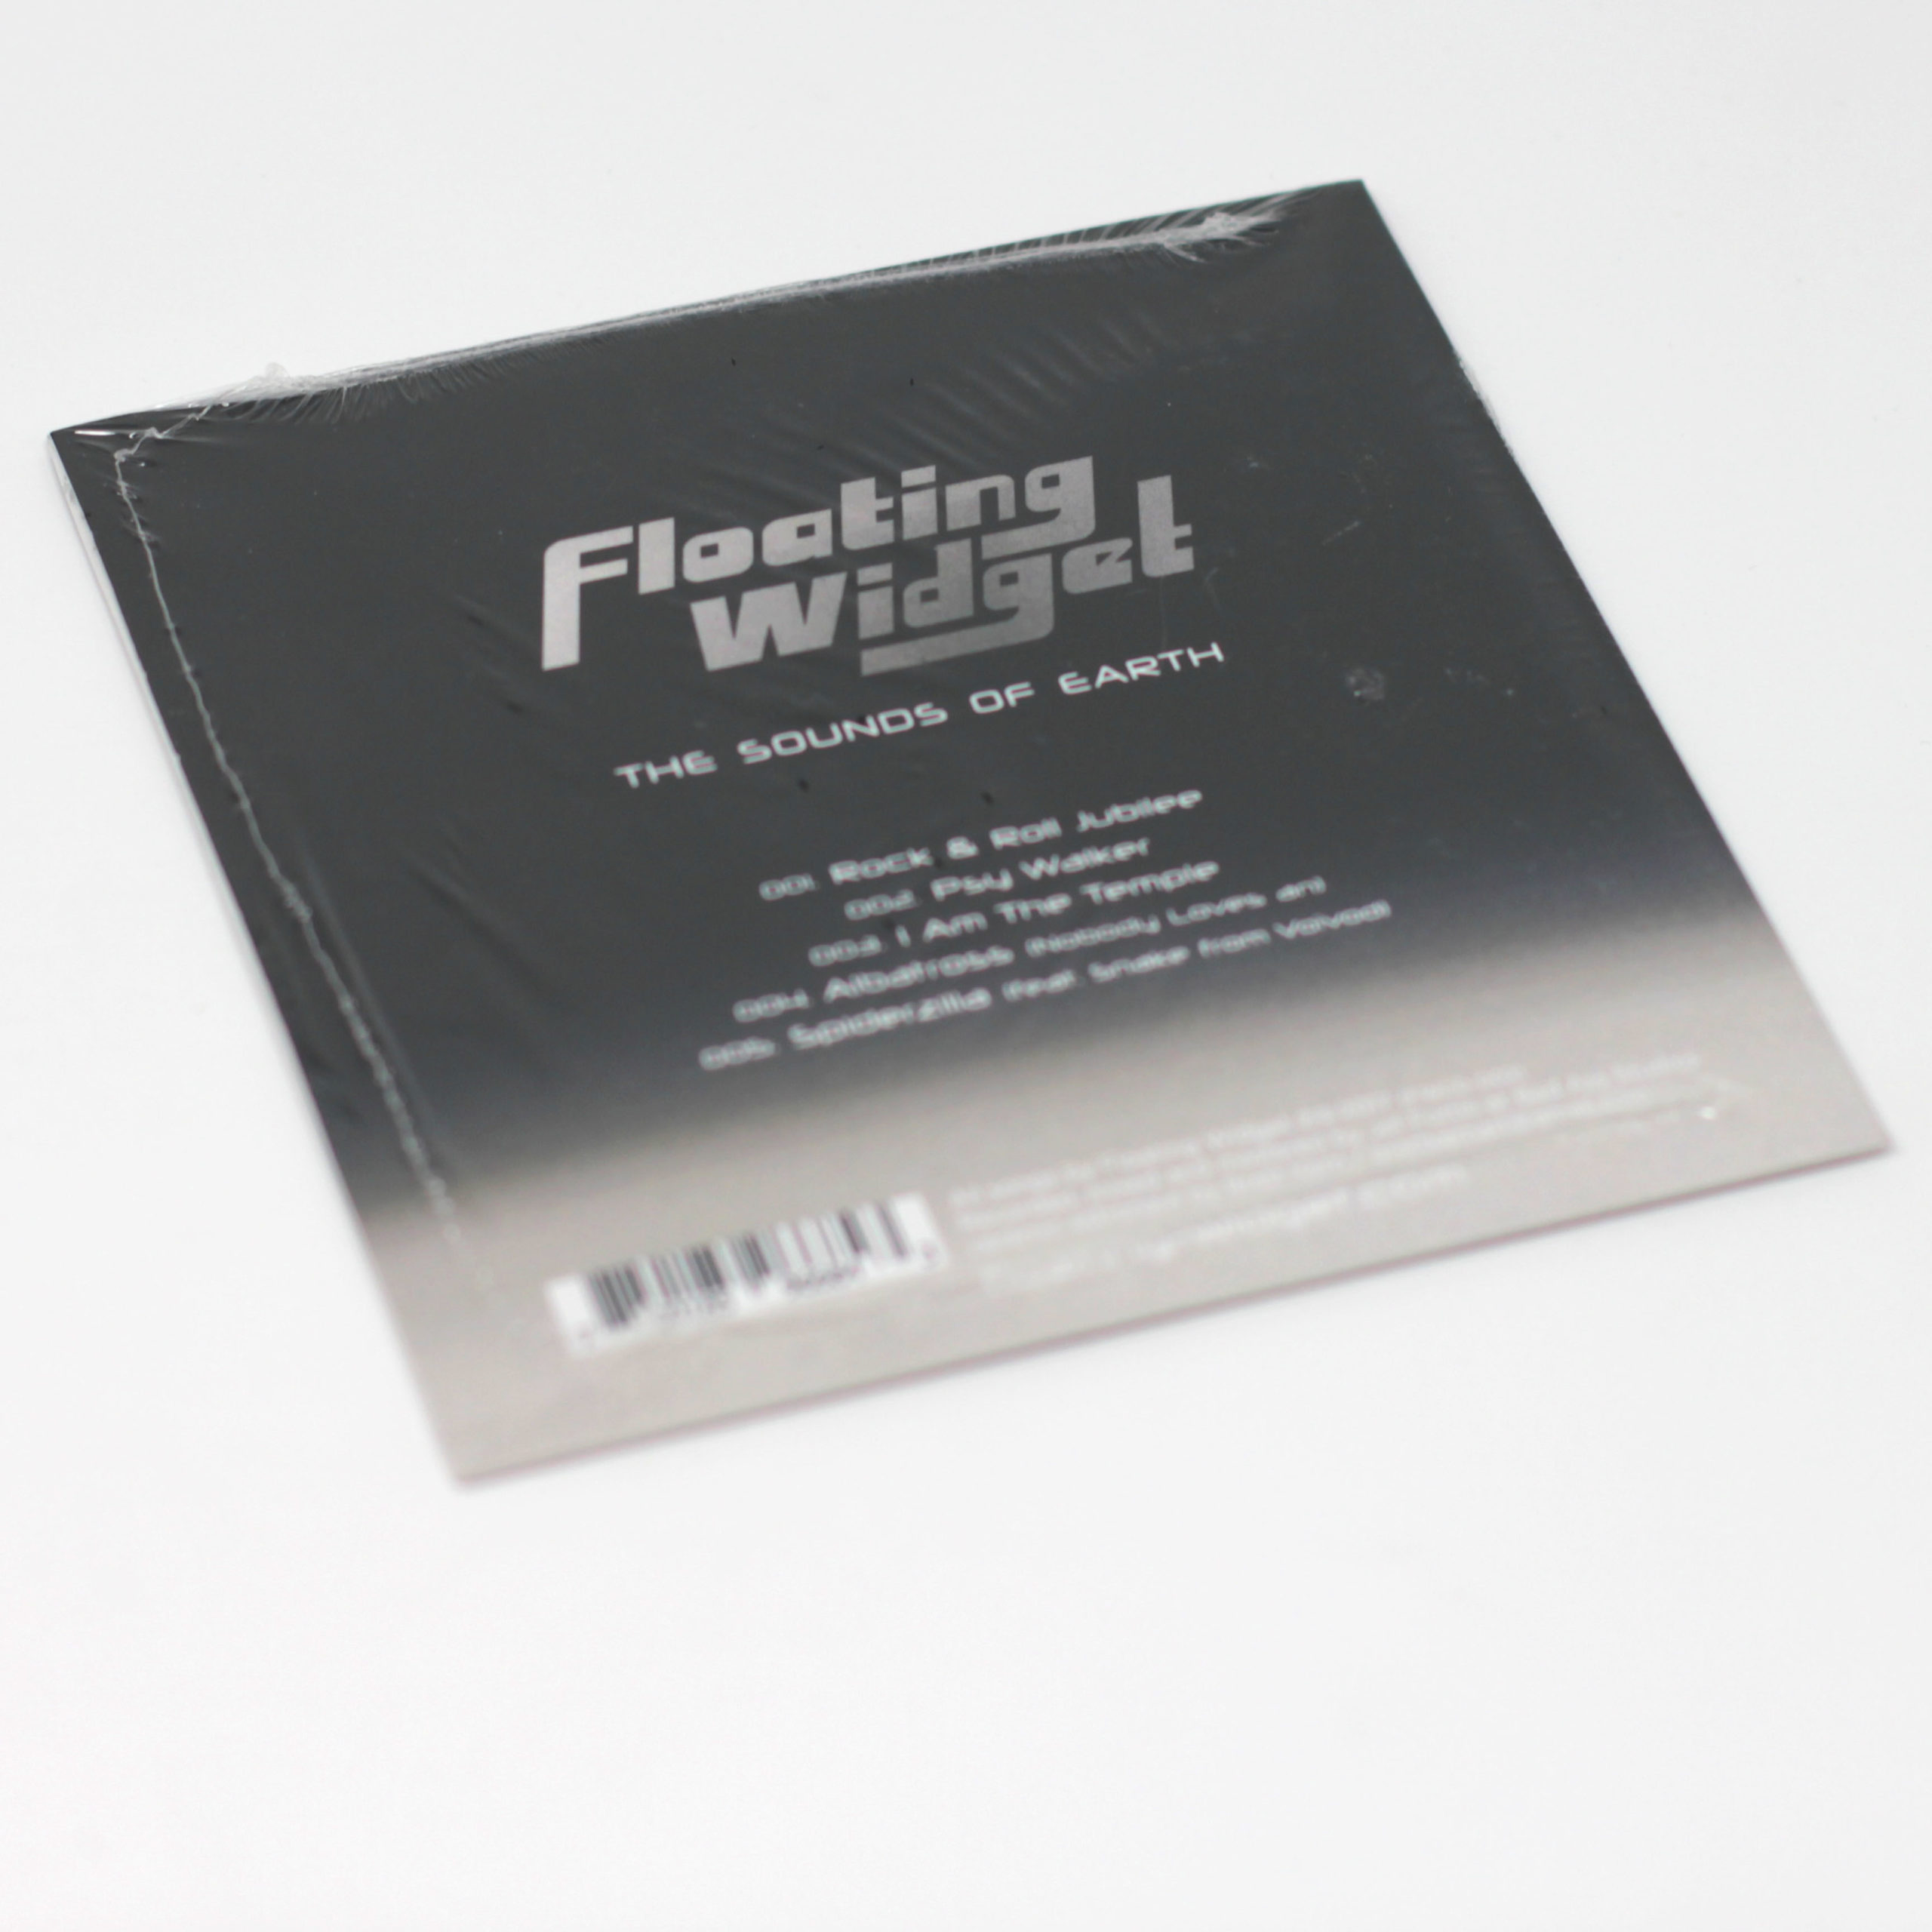 Floating Widget “The Sounds Of Earth” CD